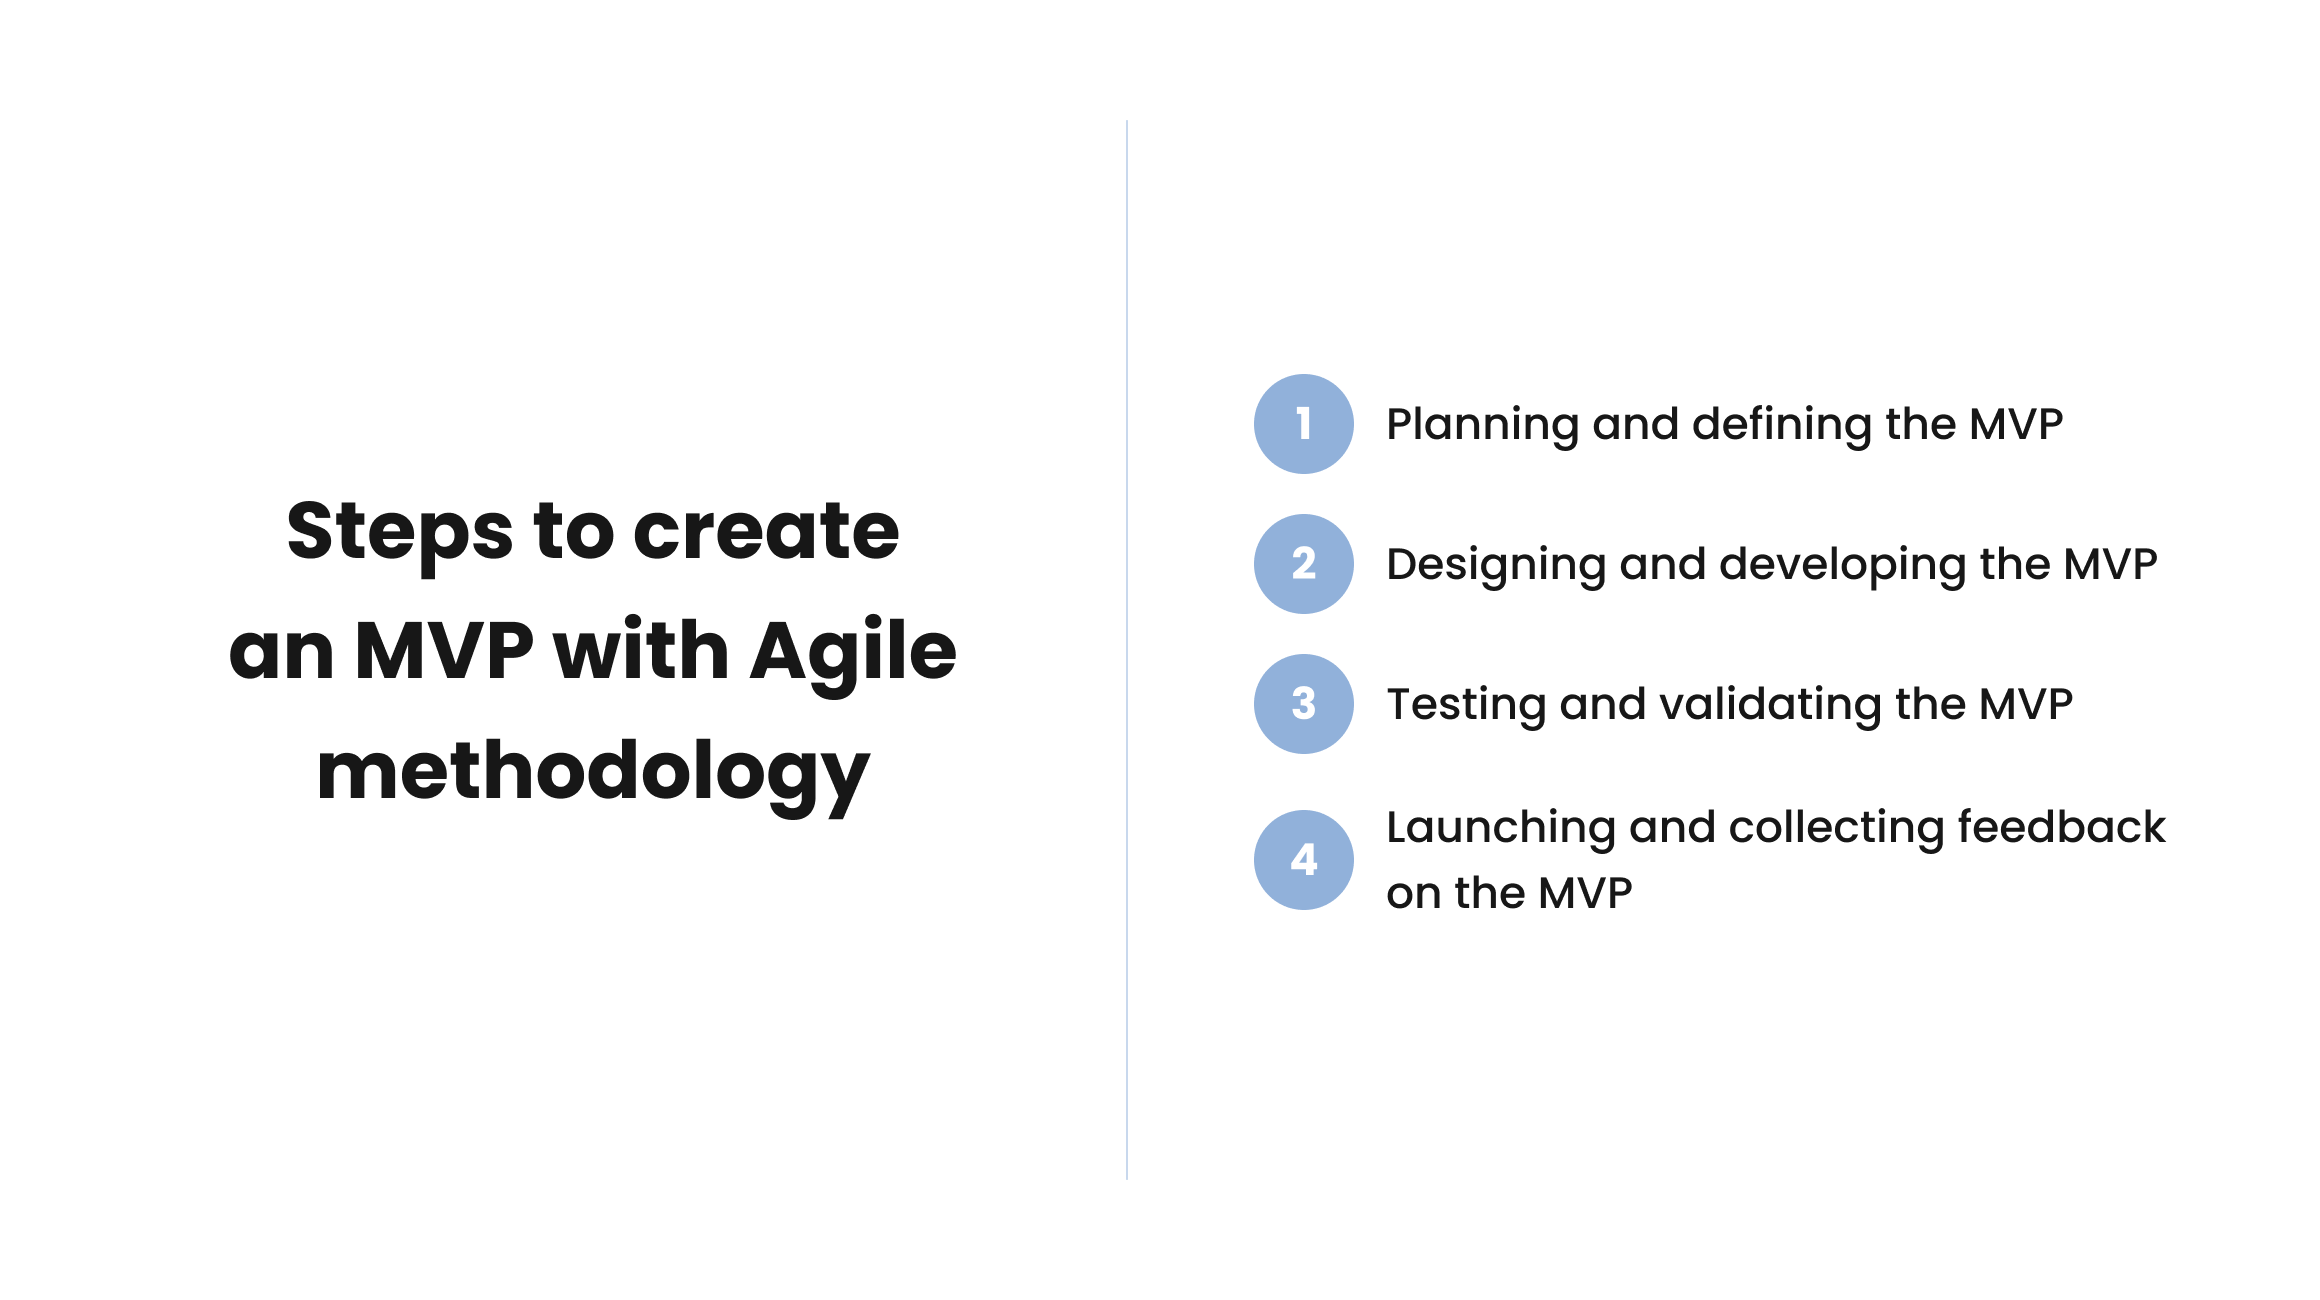 The process of developing an MVP with Agile methodology